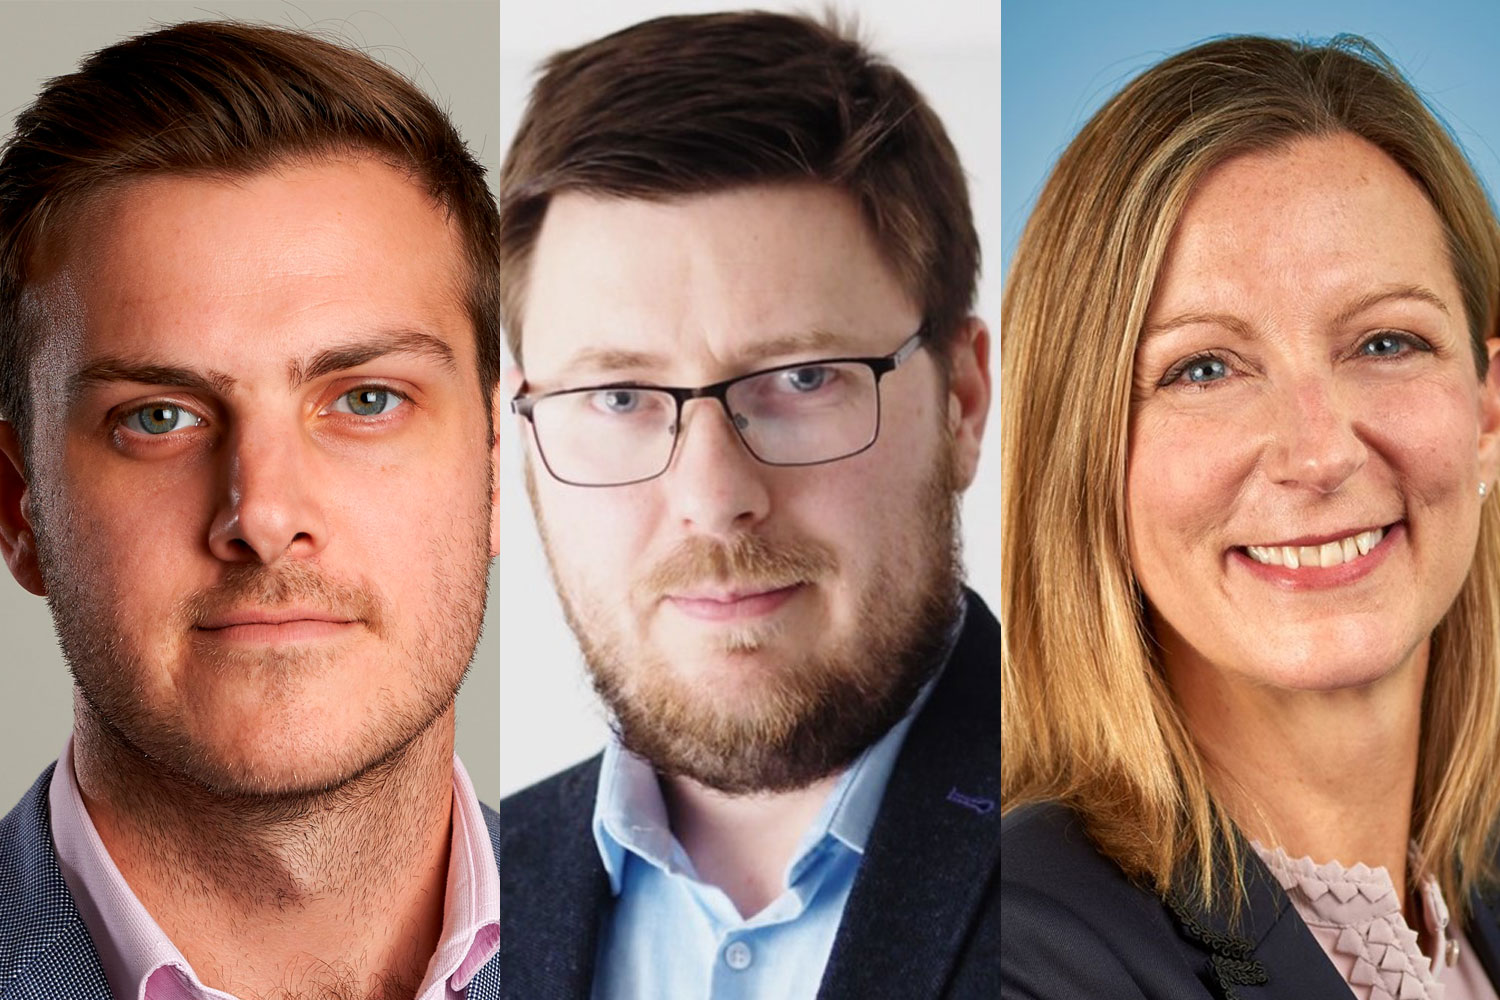 Judges confirmed for The Race Media Awards